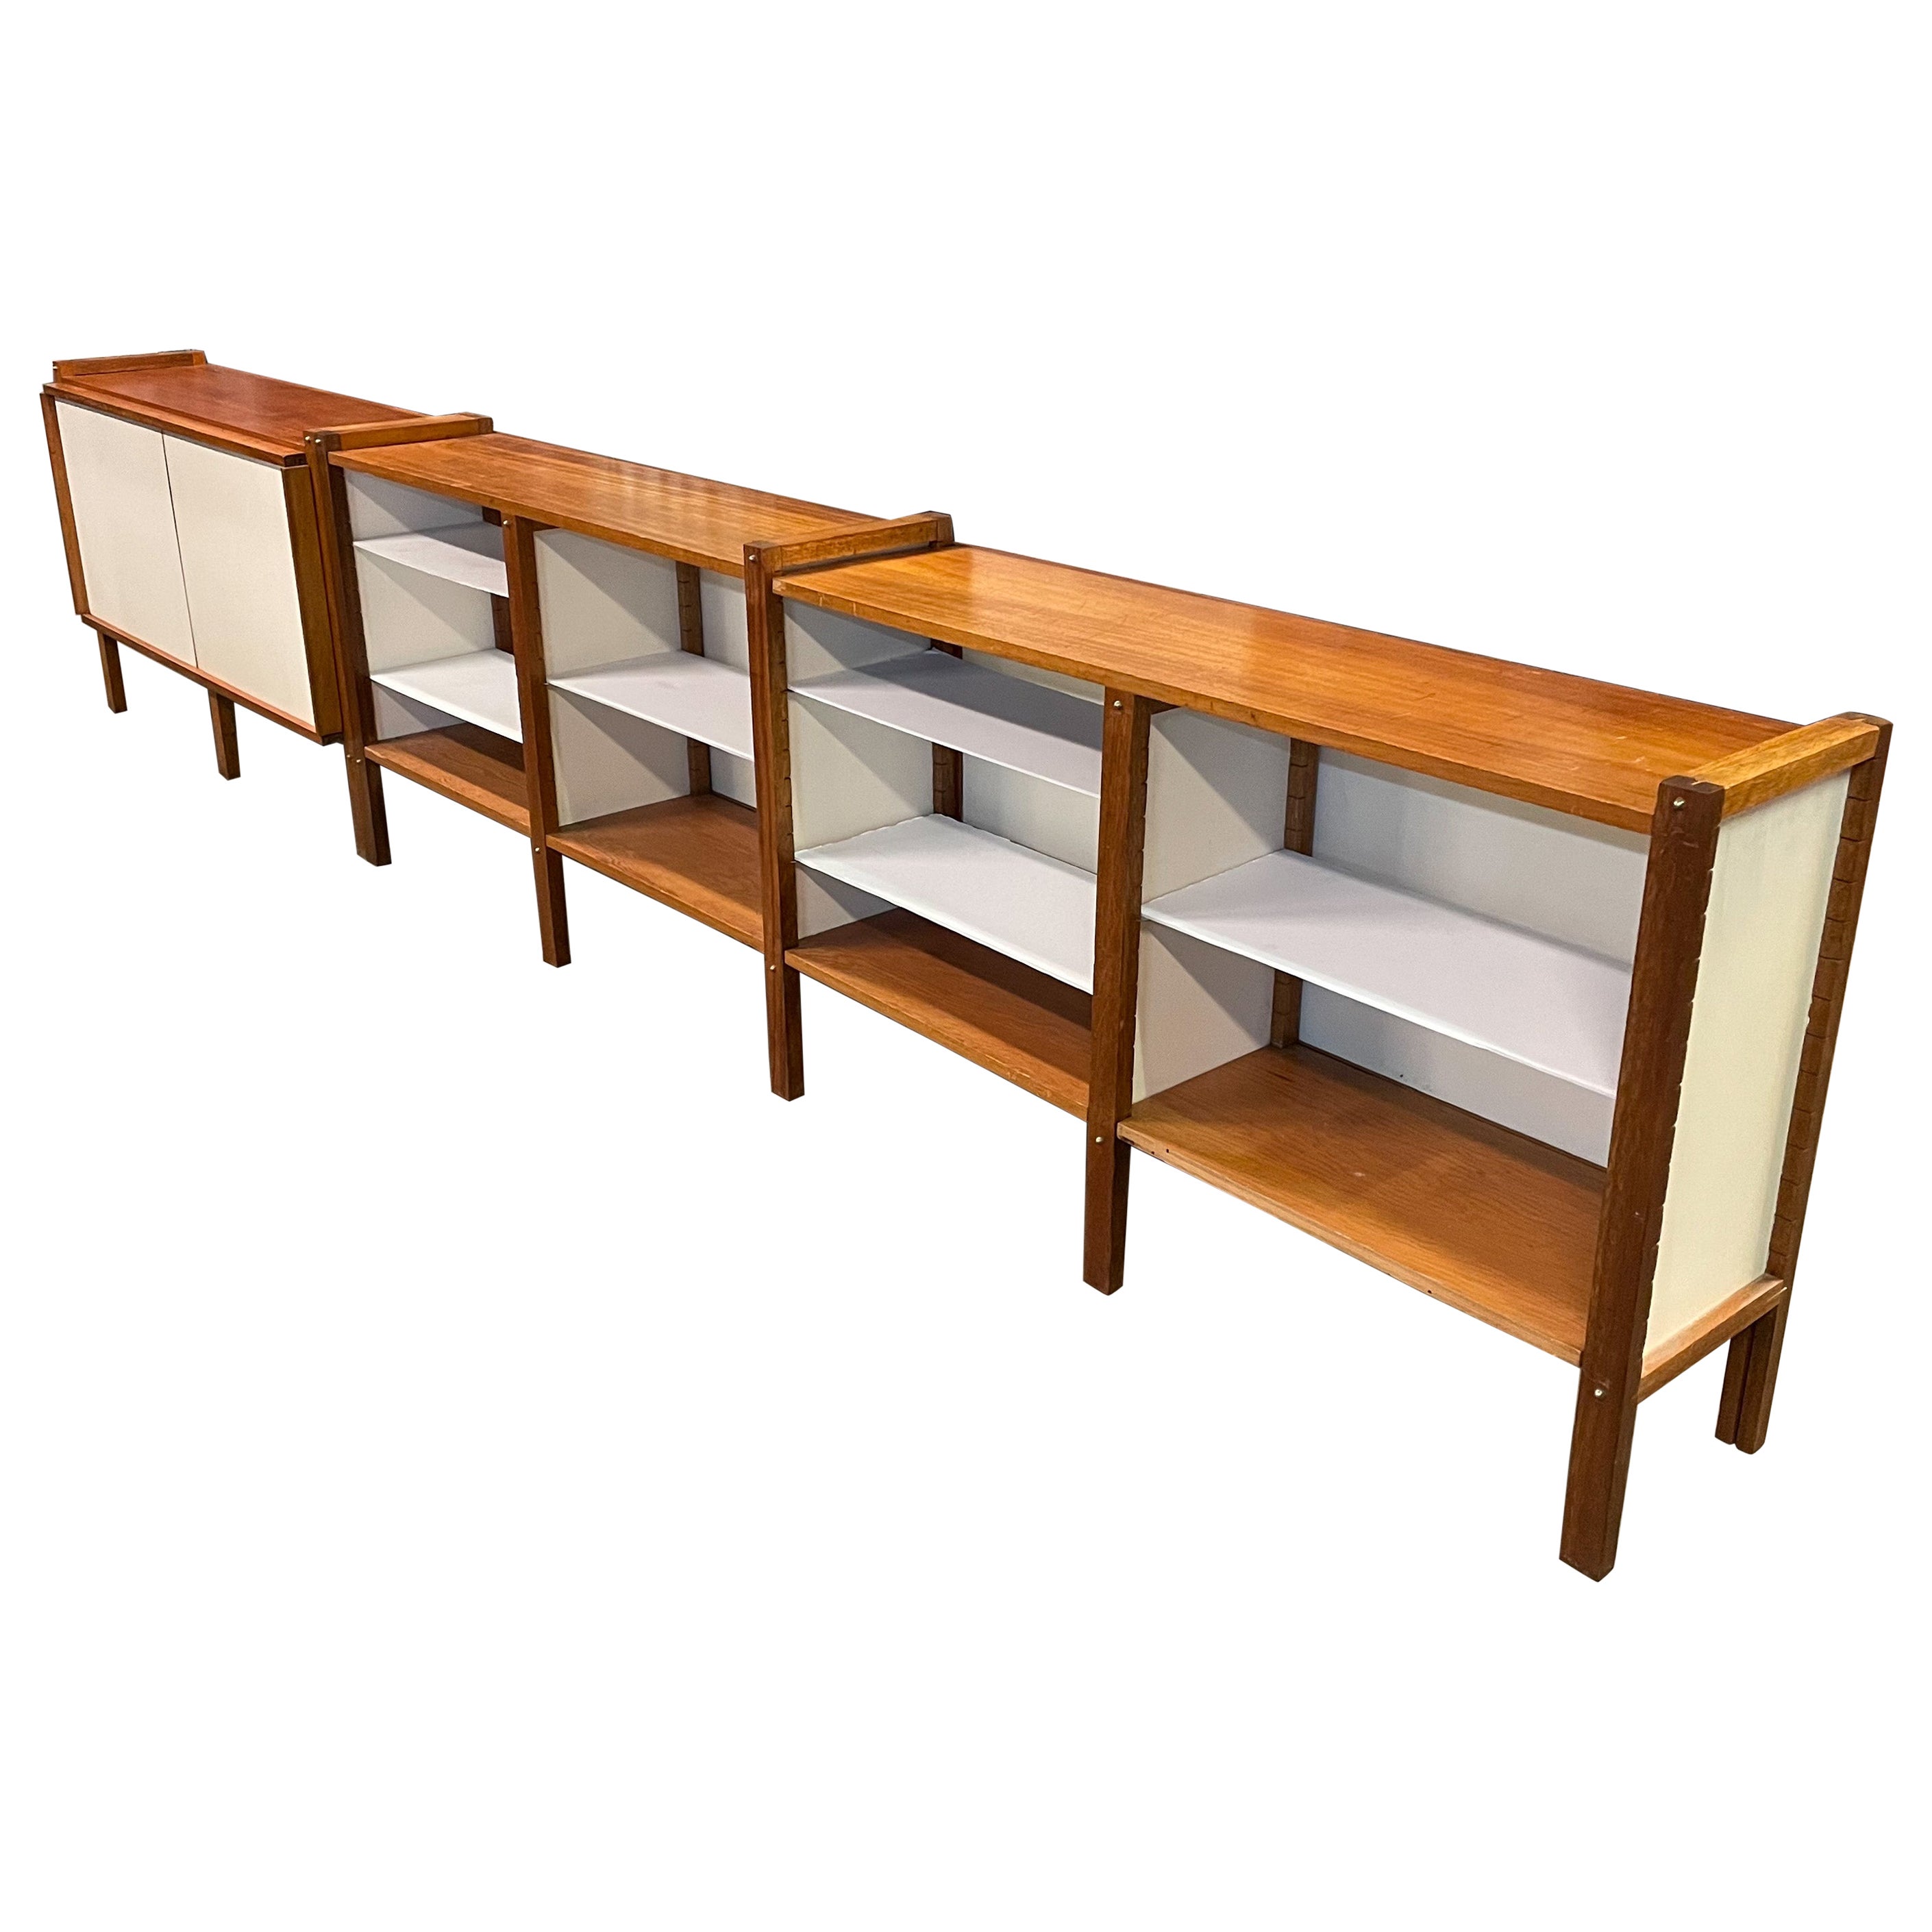 Carl Koch Techbuilt Spacemaking Furniture For Sale